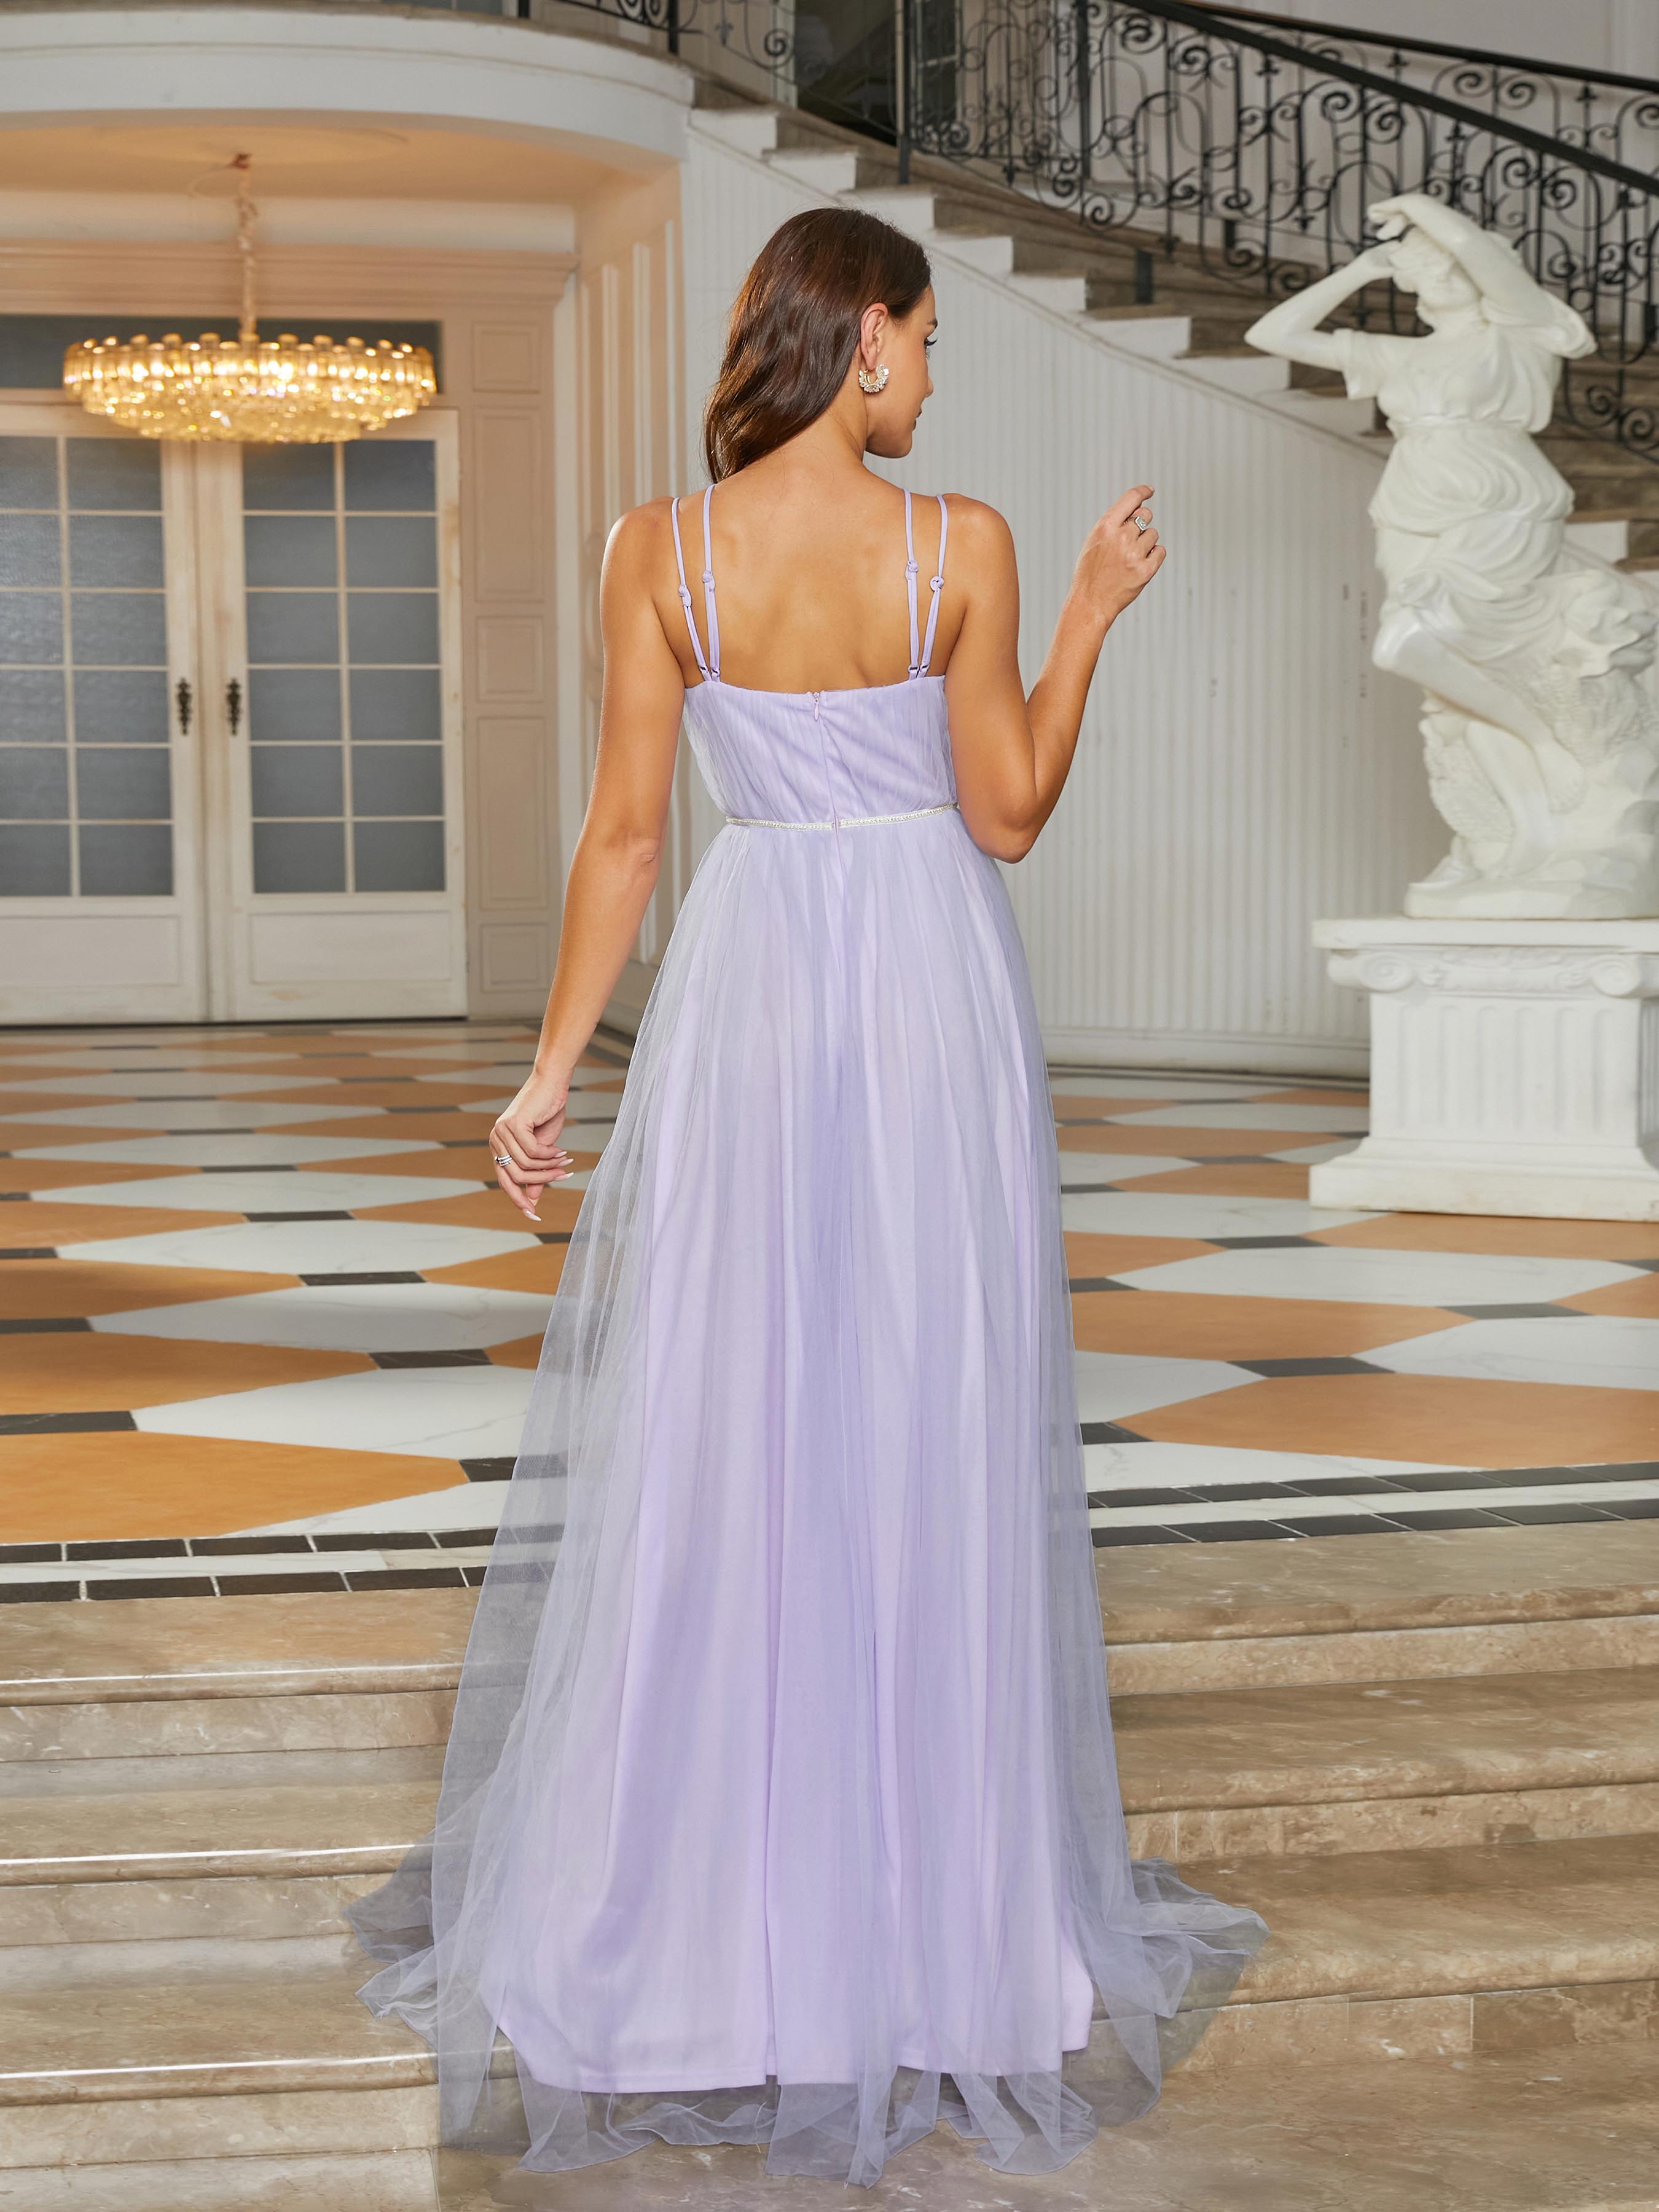 Spaghetti Straps Cut out Purple Tulle Wedding Guest Dress RJ11112 - MISS ORD